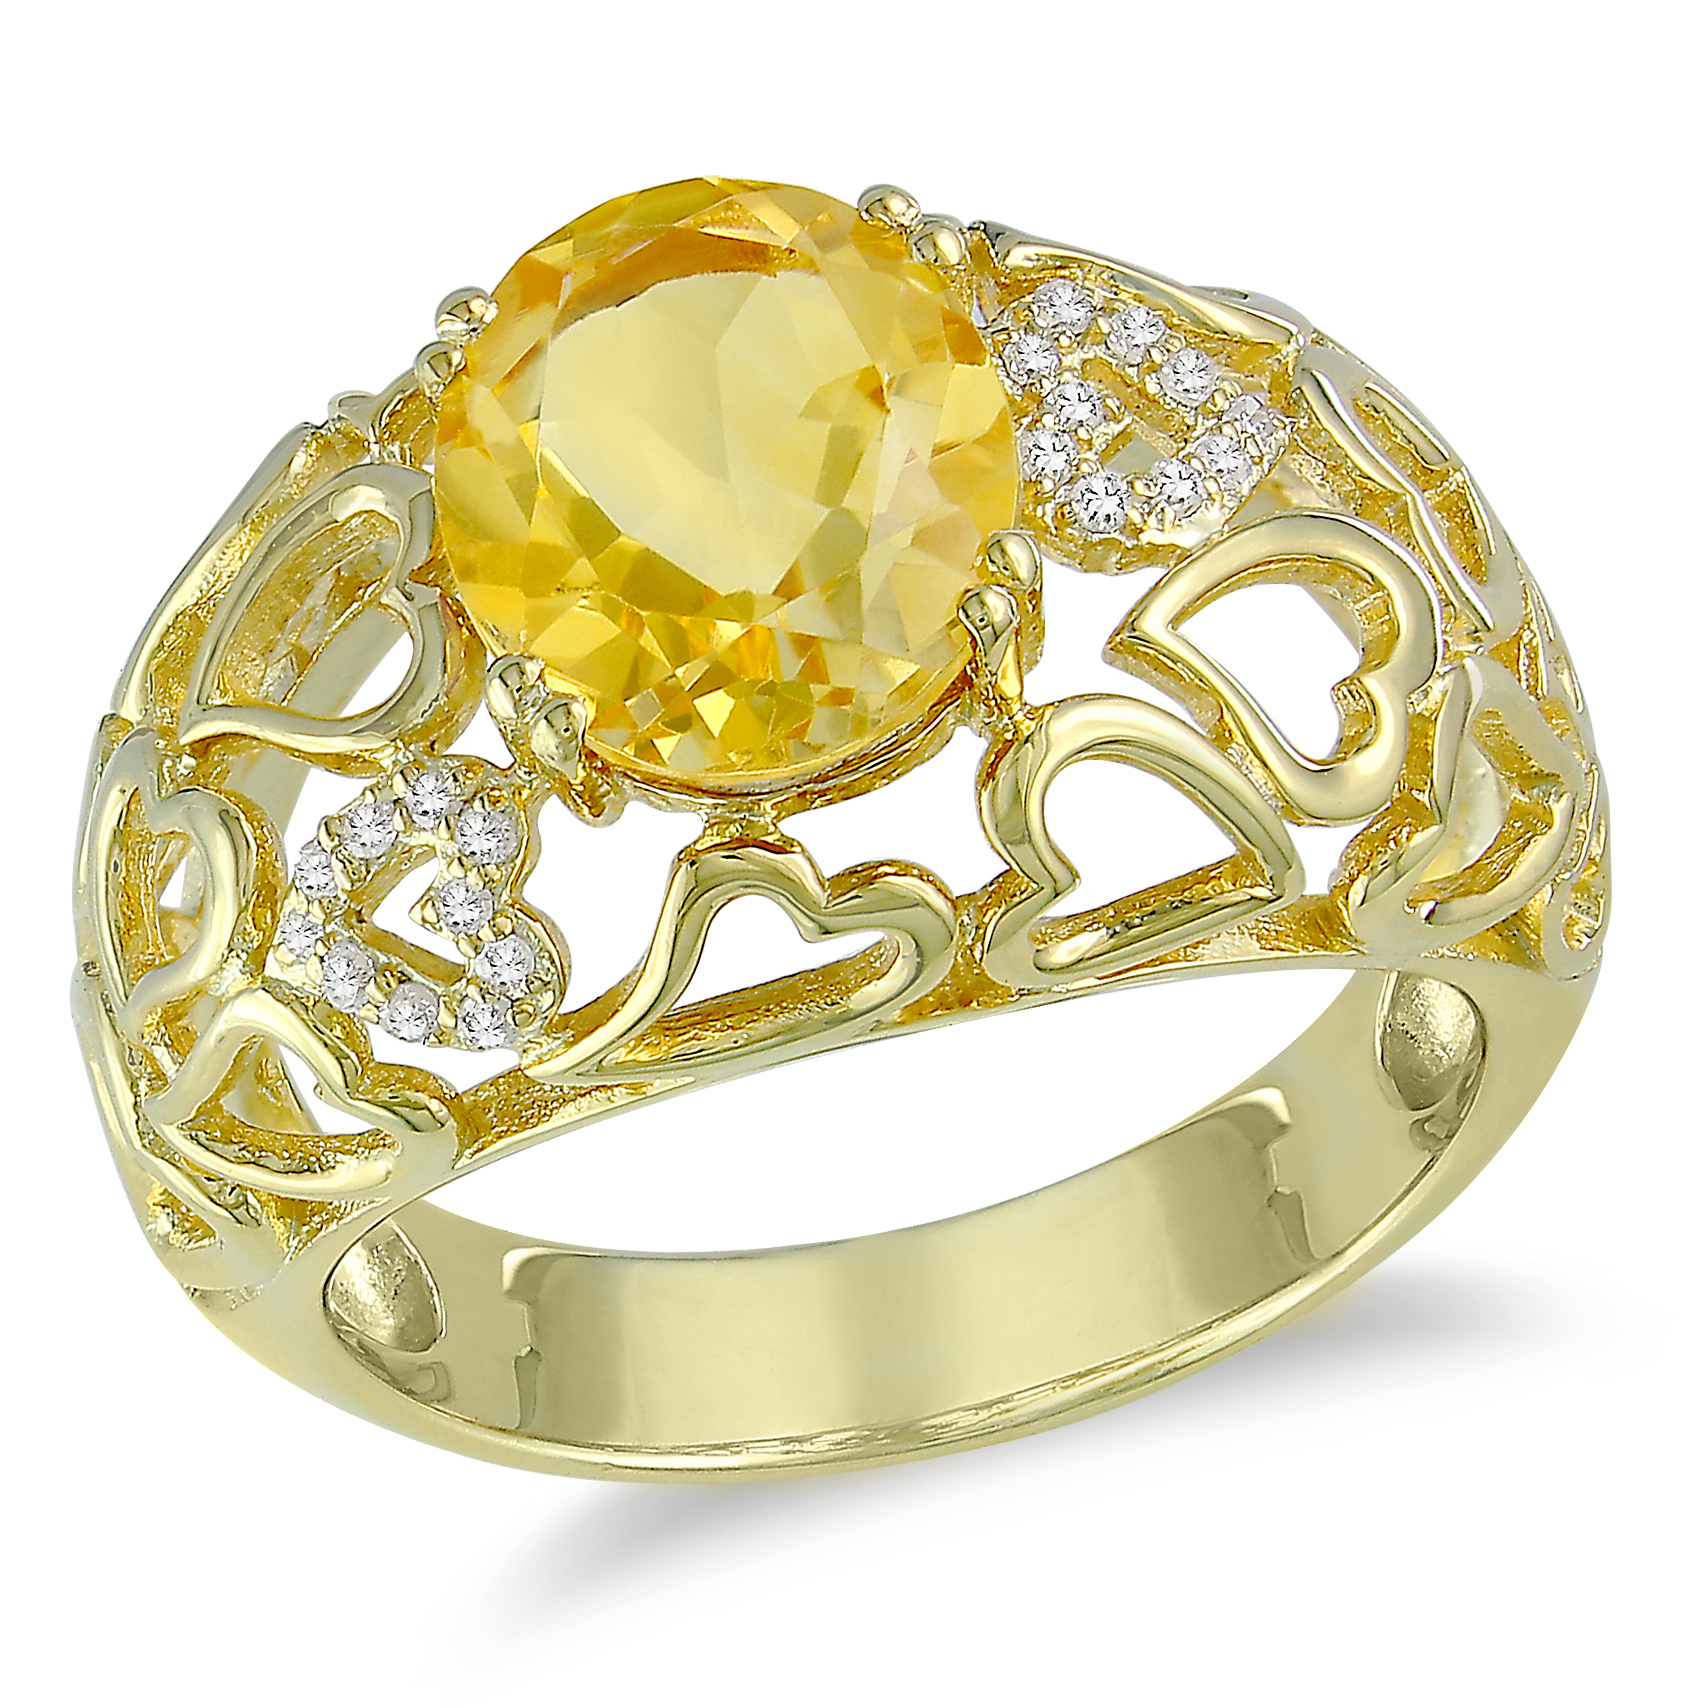 0.06 Carat T.W. Diamond and 3 3/8 Carat T.G.W. Citrine Fashion Ring in Gold Plated Sterling Silver GH I3